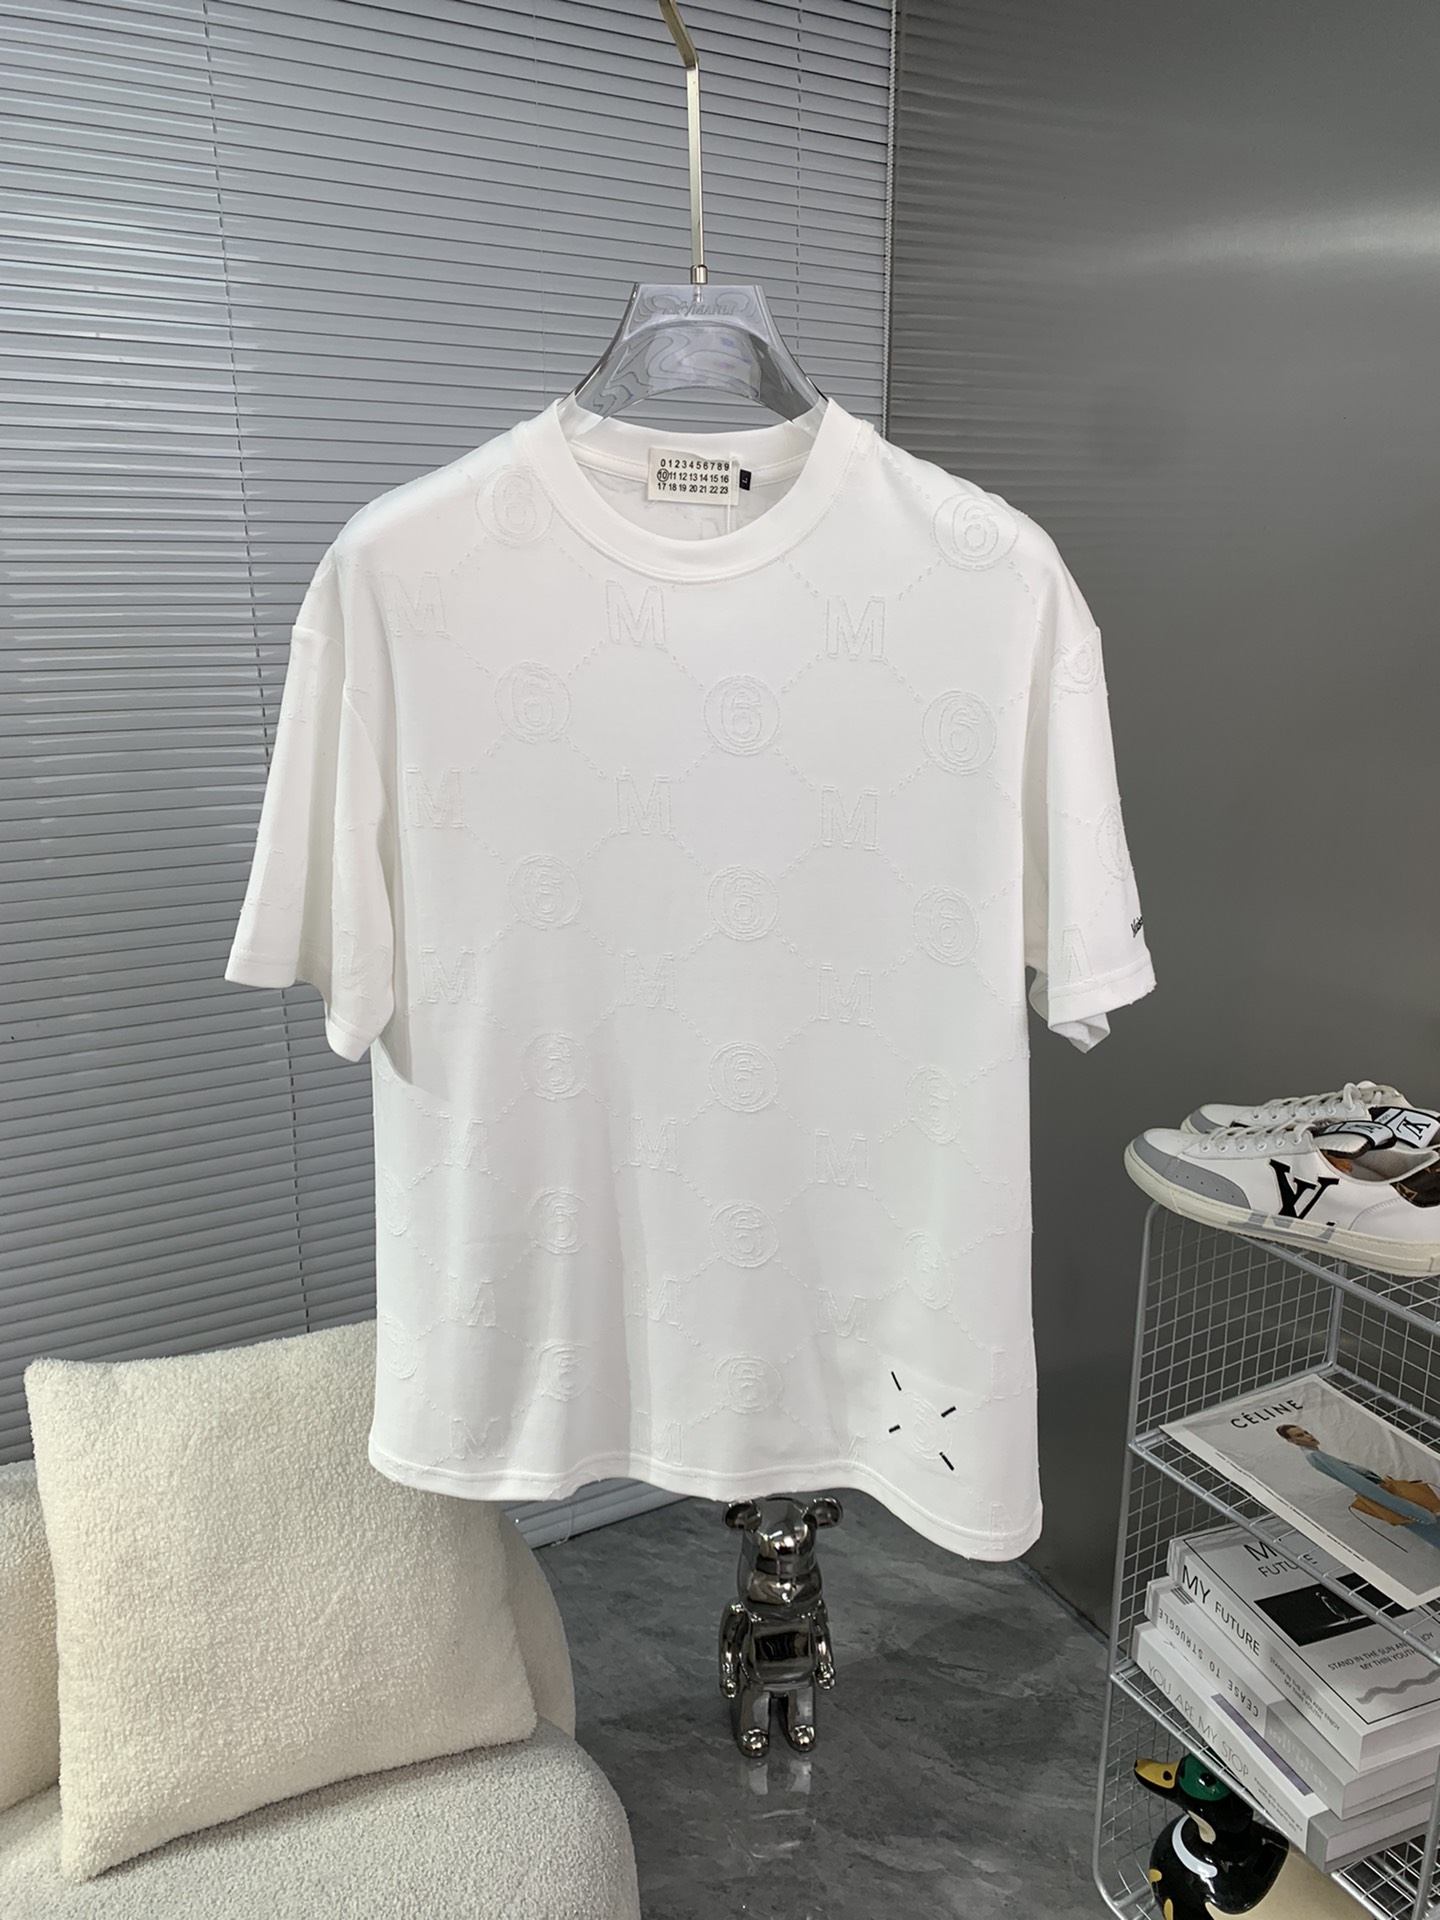 Clothing T-Shirt Best Quality Fake
 Cotton Mercerized Spring/Summer Collection Short Sleeve